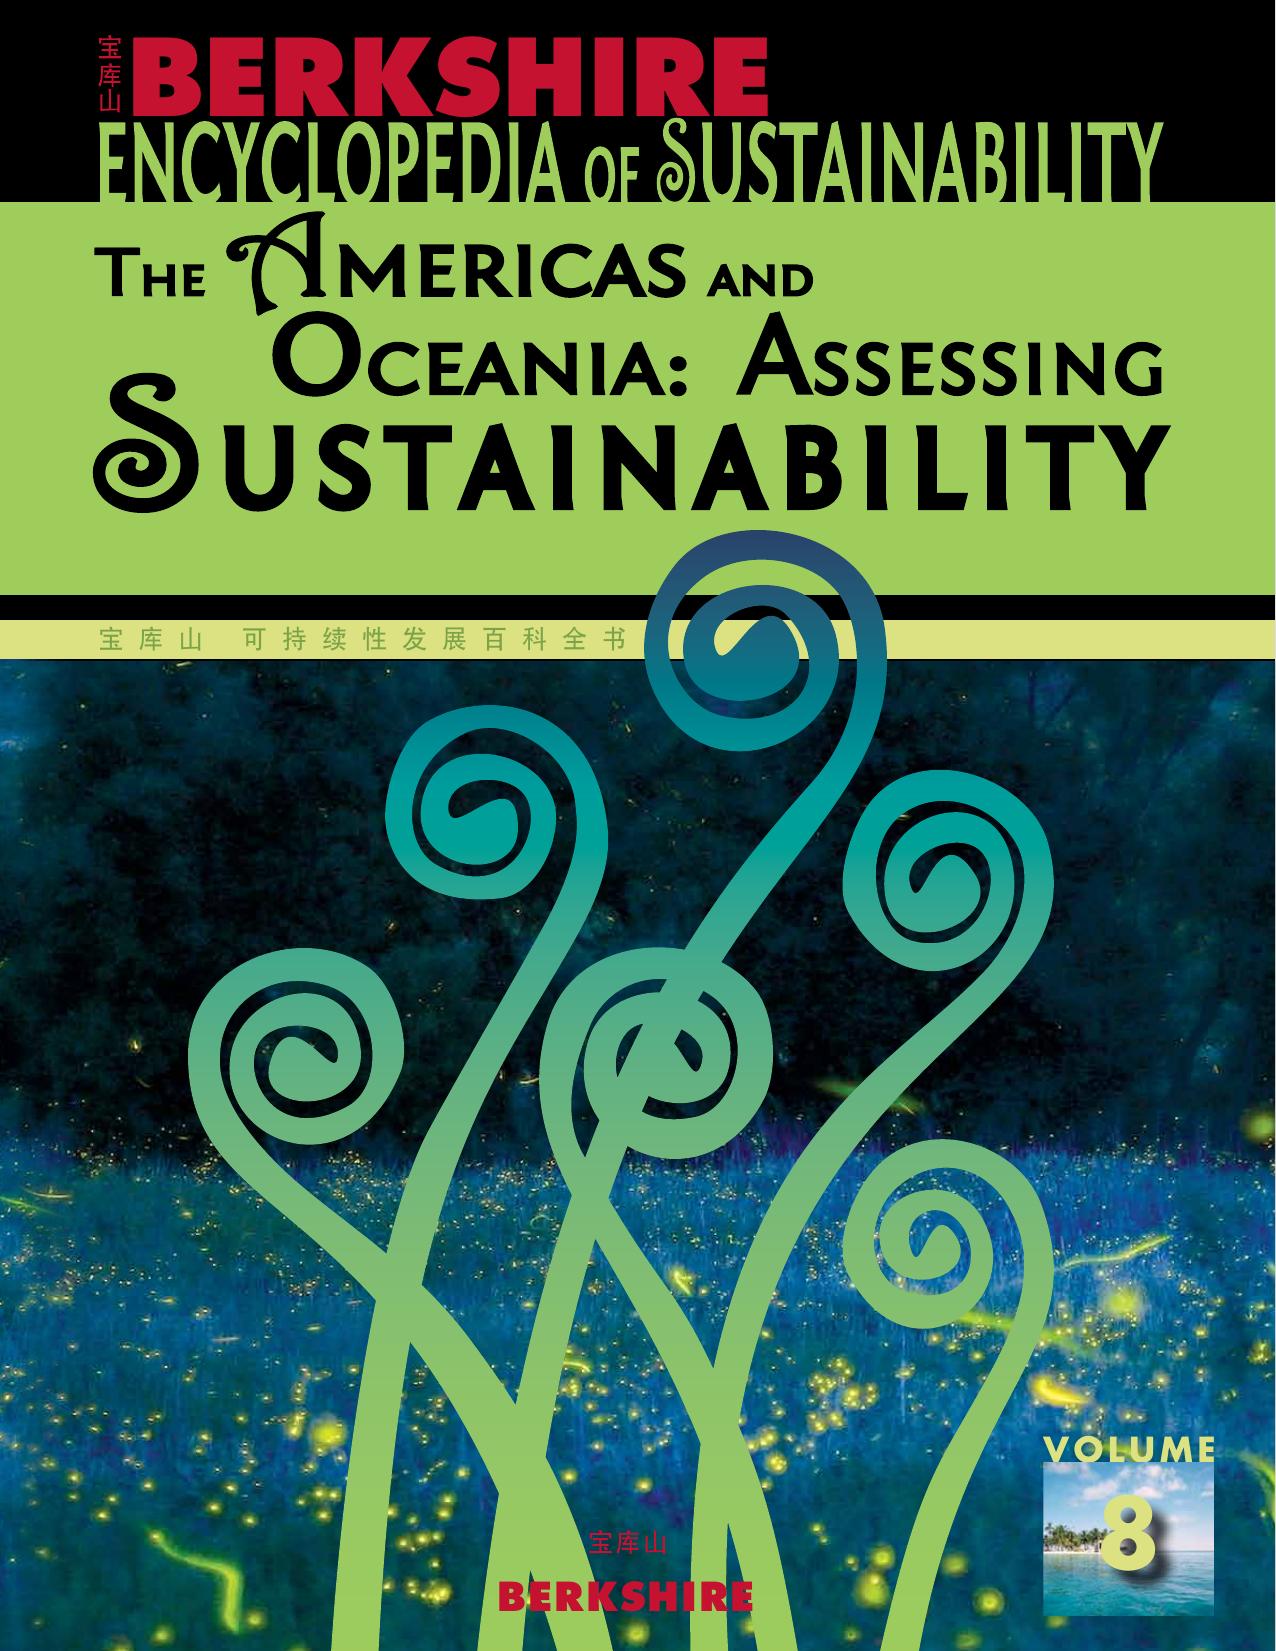 Berkshire Encyclopedia of Sustainability 8/10: The Americas and Oceania: Assessing Sustainability